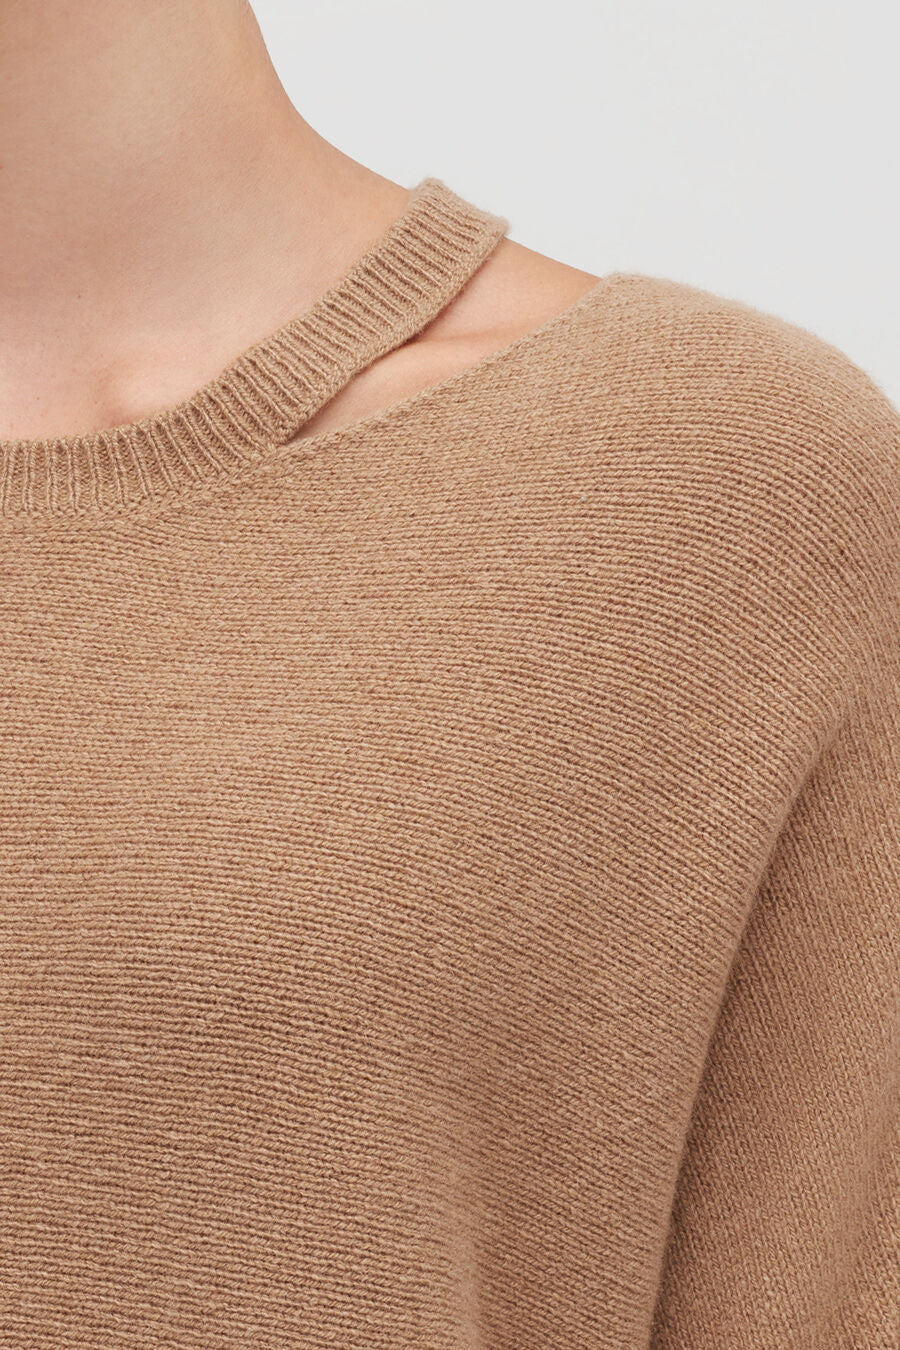 Close-up of a person wearing a sweater with a round neckline.